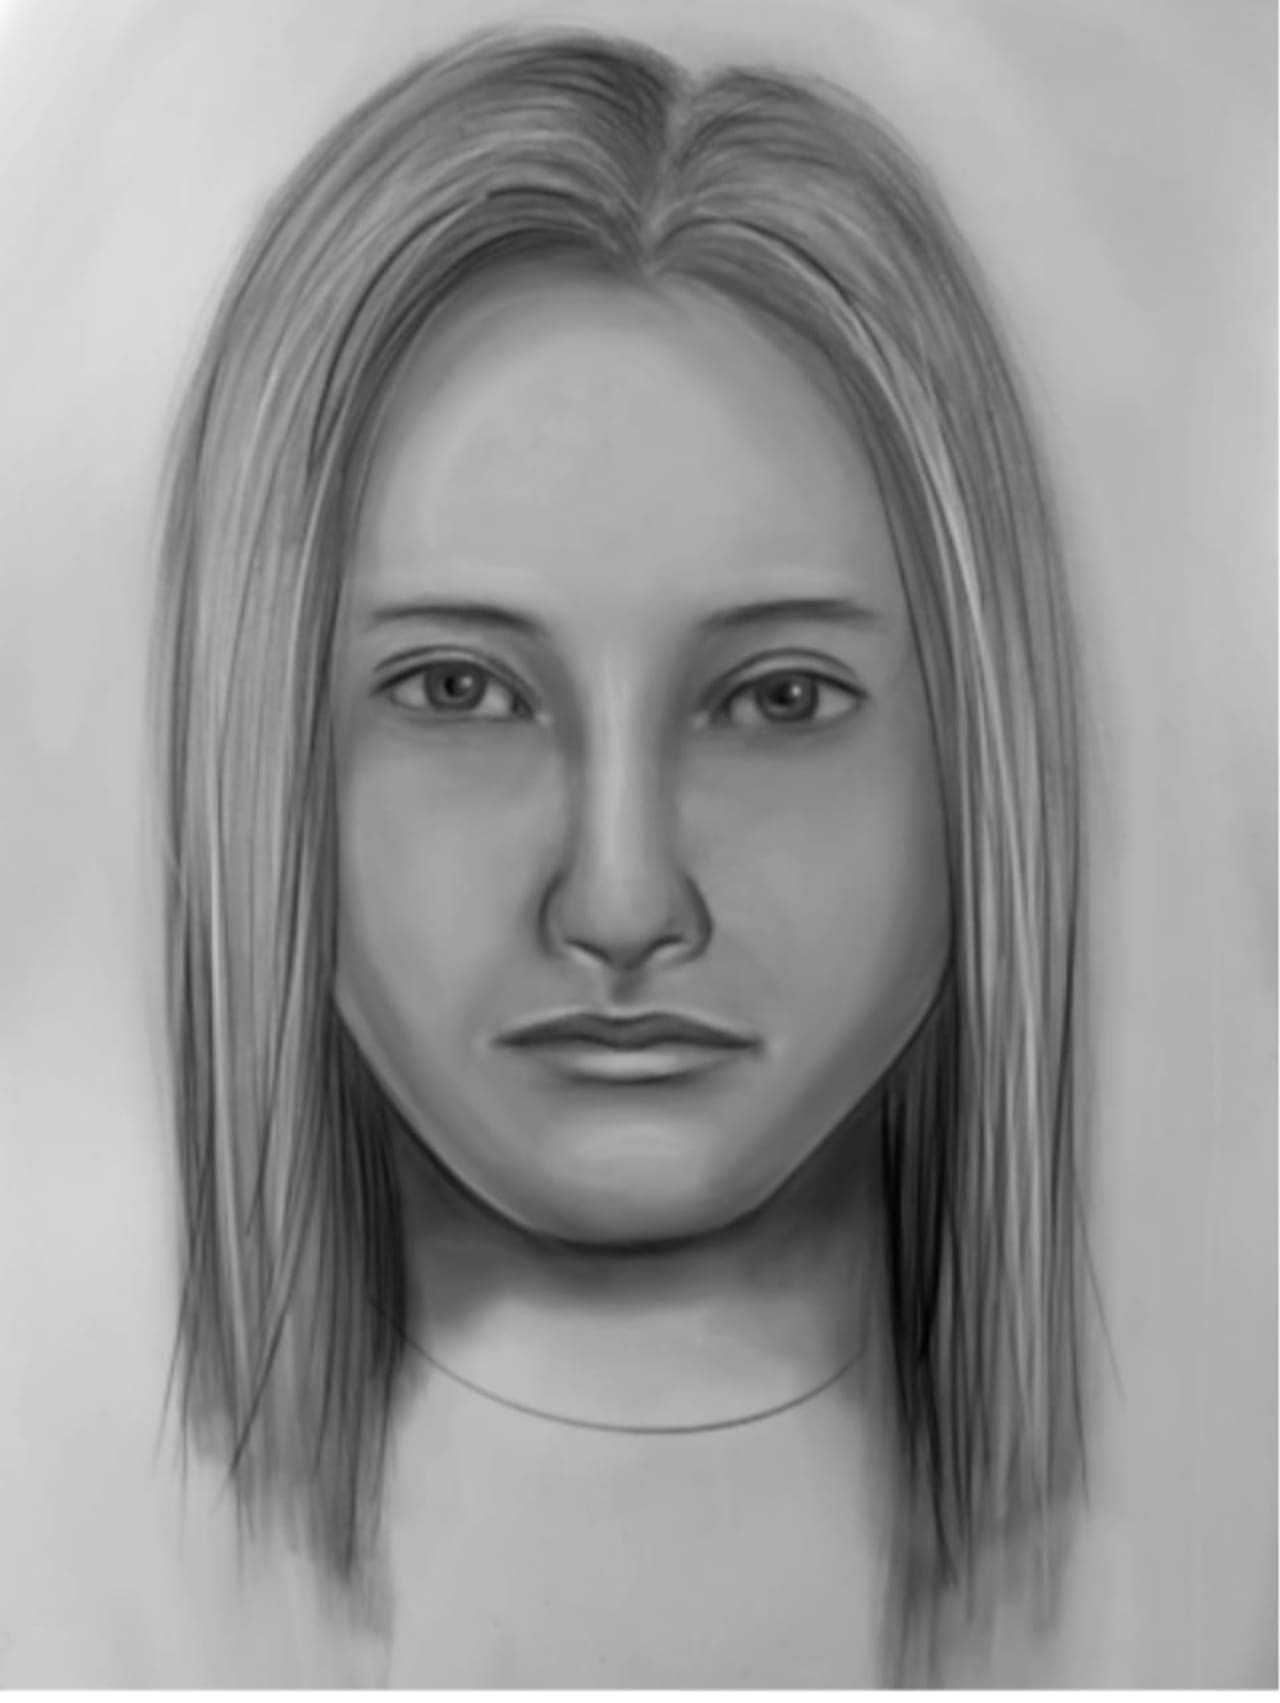 Know her? Suffolk County police are asking for the public's help identifying a woman who hit and killed a dog and then drove away.